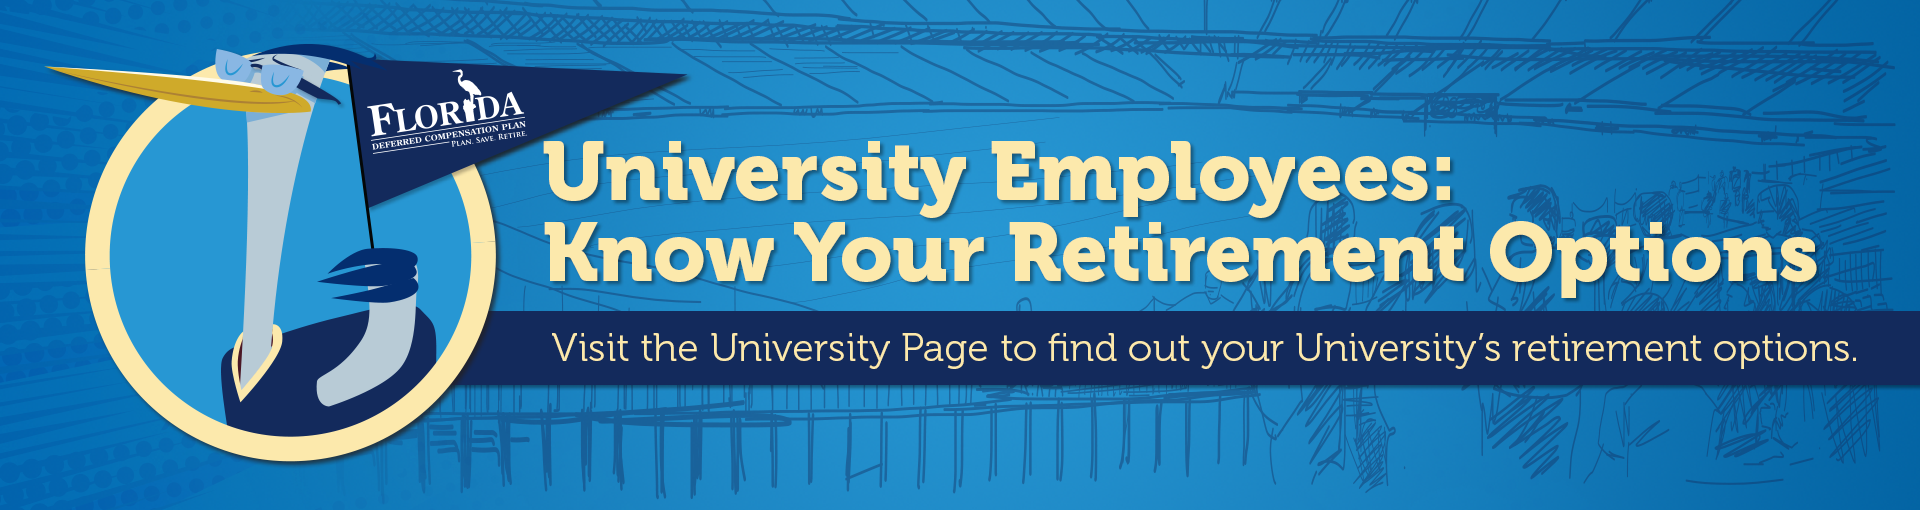 University Employees: Know Your Benefits: Visit the University Page to find out your University's retirement options.